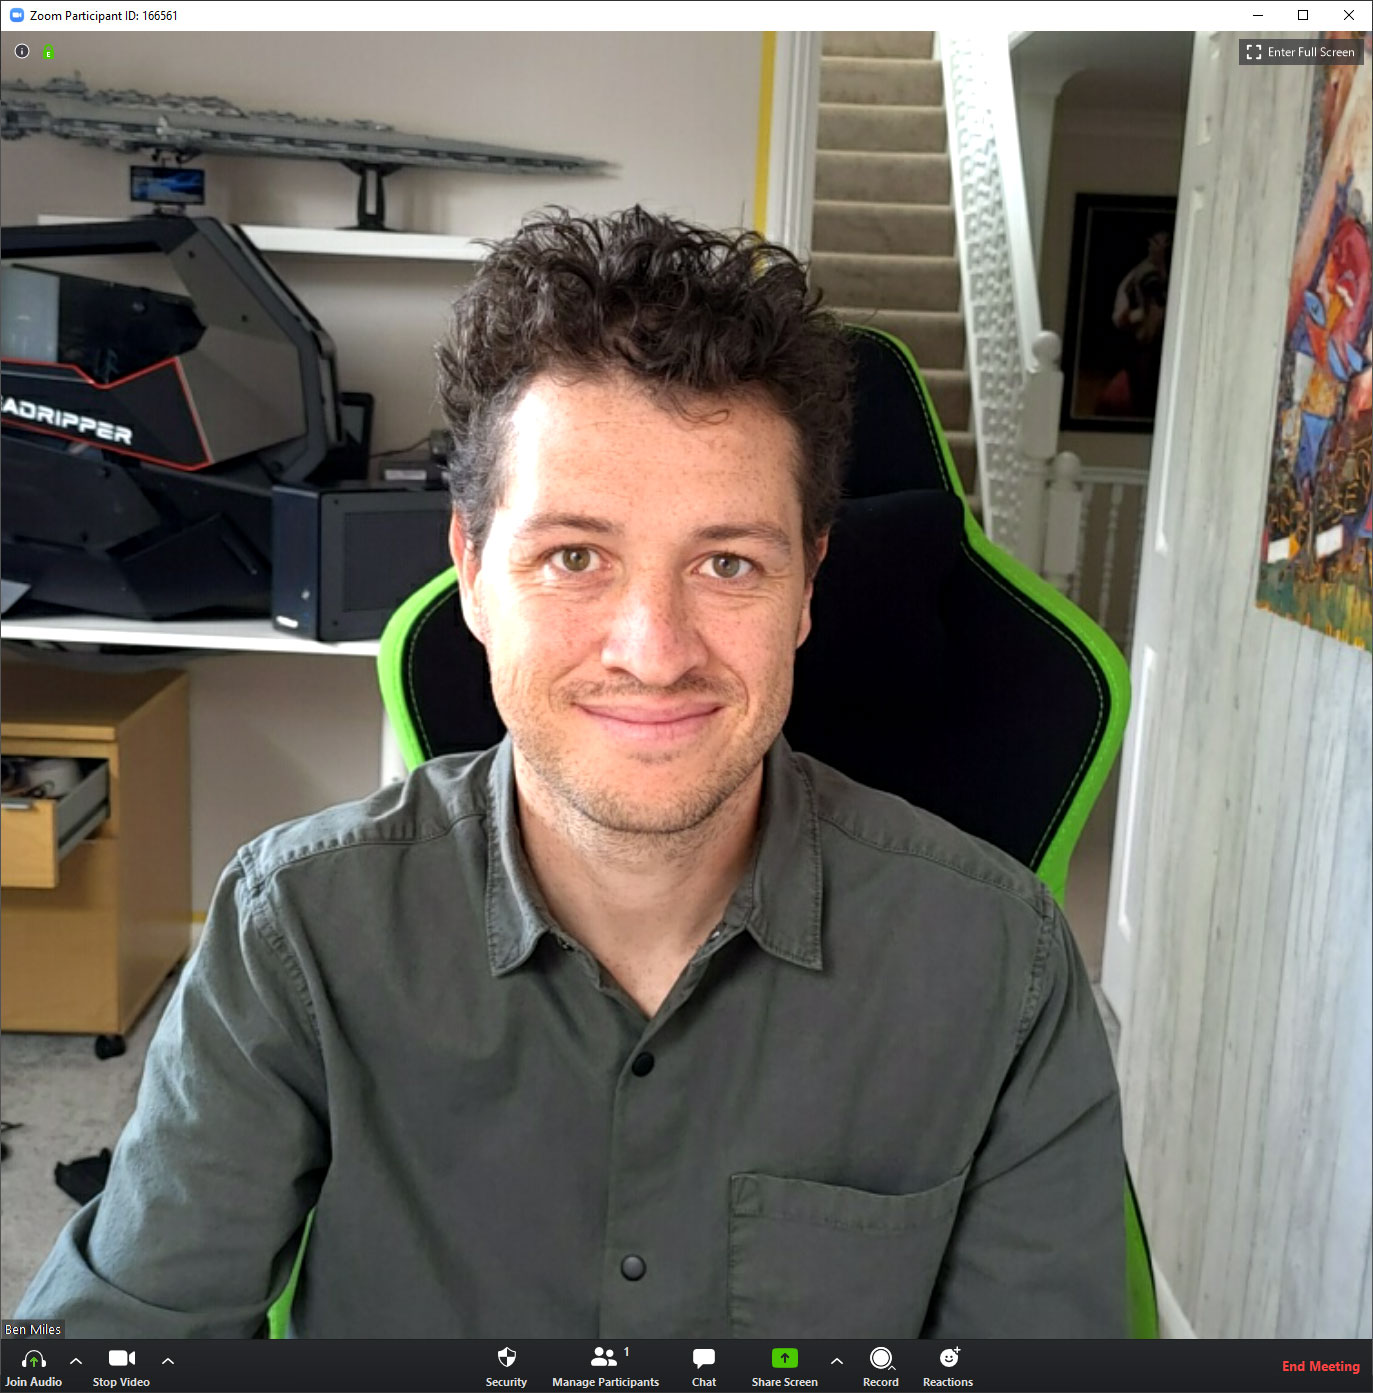 Screenshot of a Zoom call in which the image of the smiling man is being captured using his phone and DroidCam